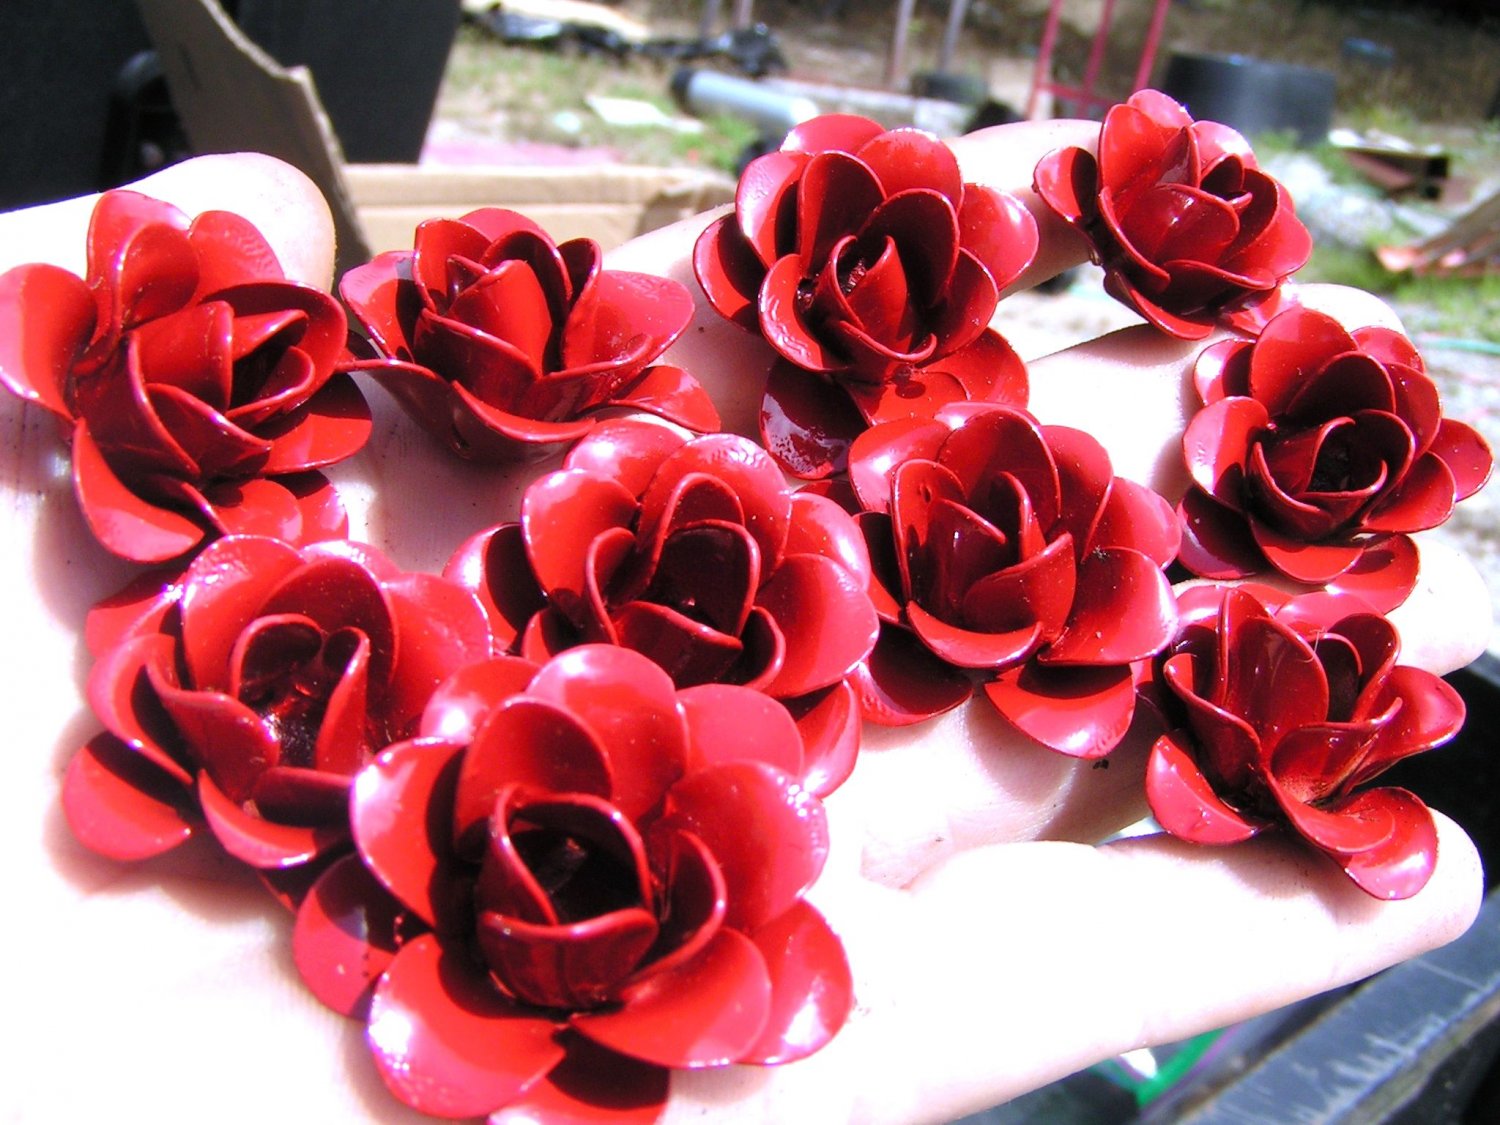 10 metal Red rose flowers for accents, embellishments, crafting, woodworking, arrangements